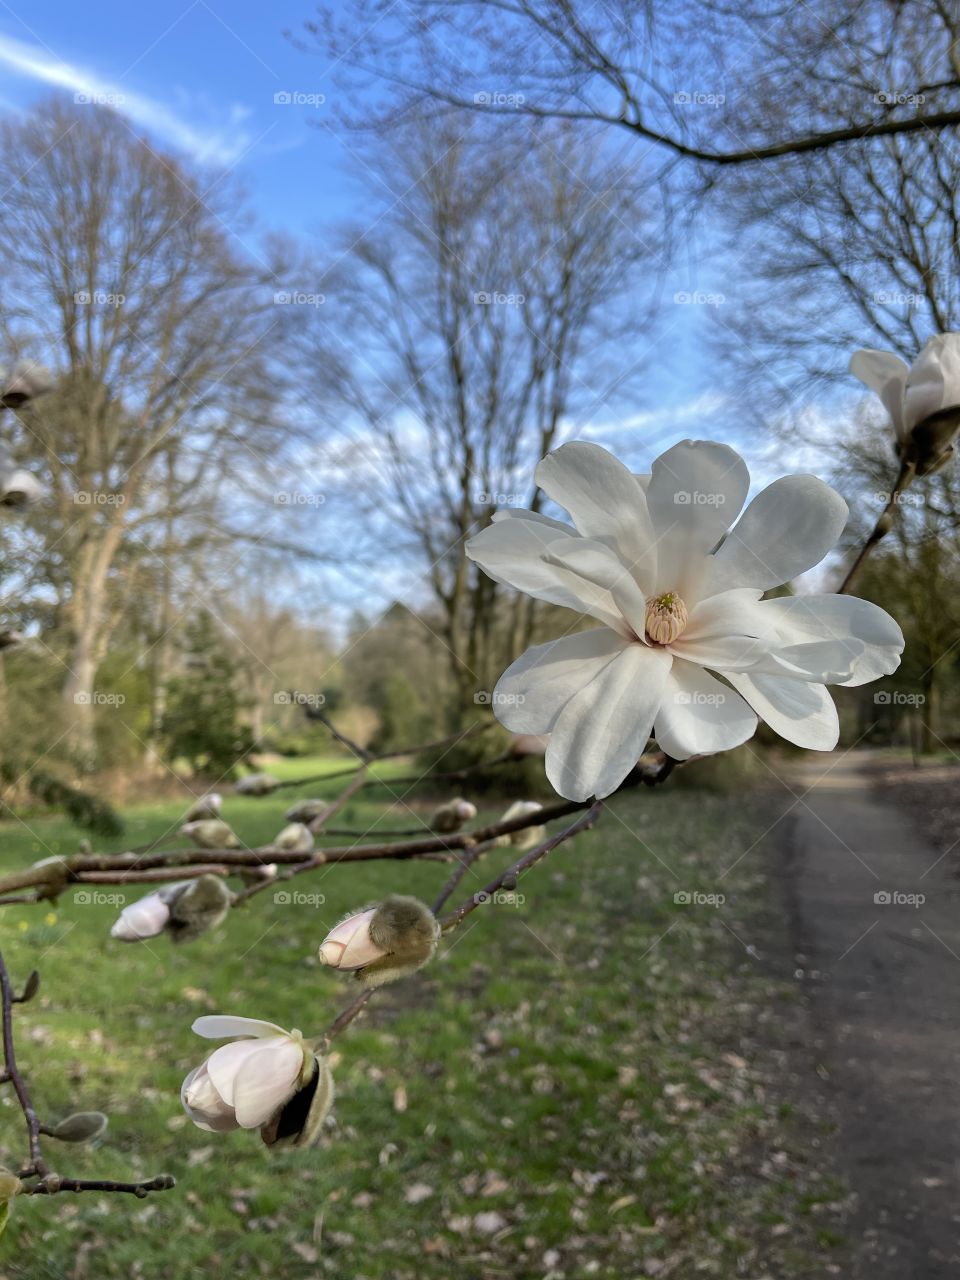 blossoming white magnolia flower in the park, path going into the distance